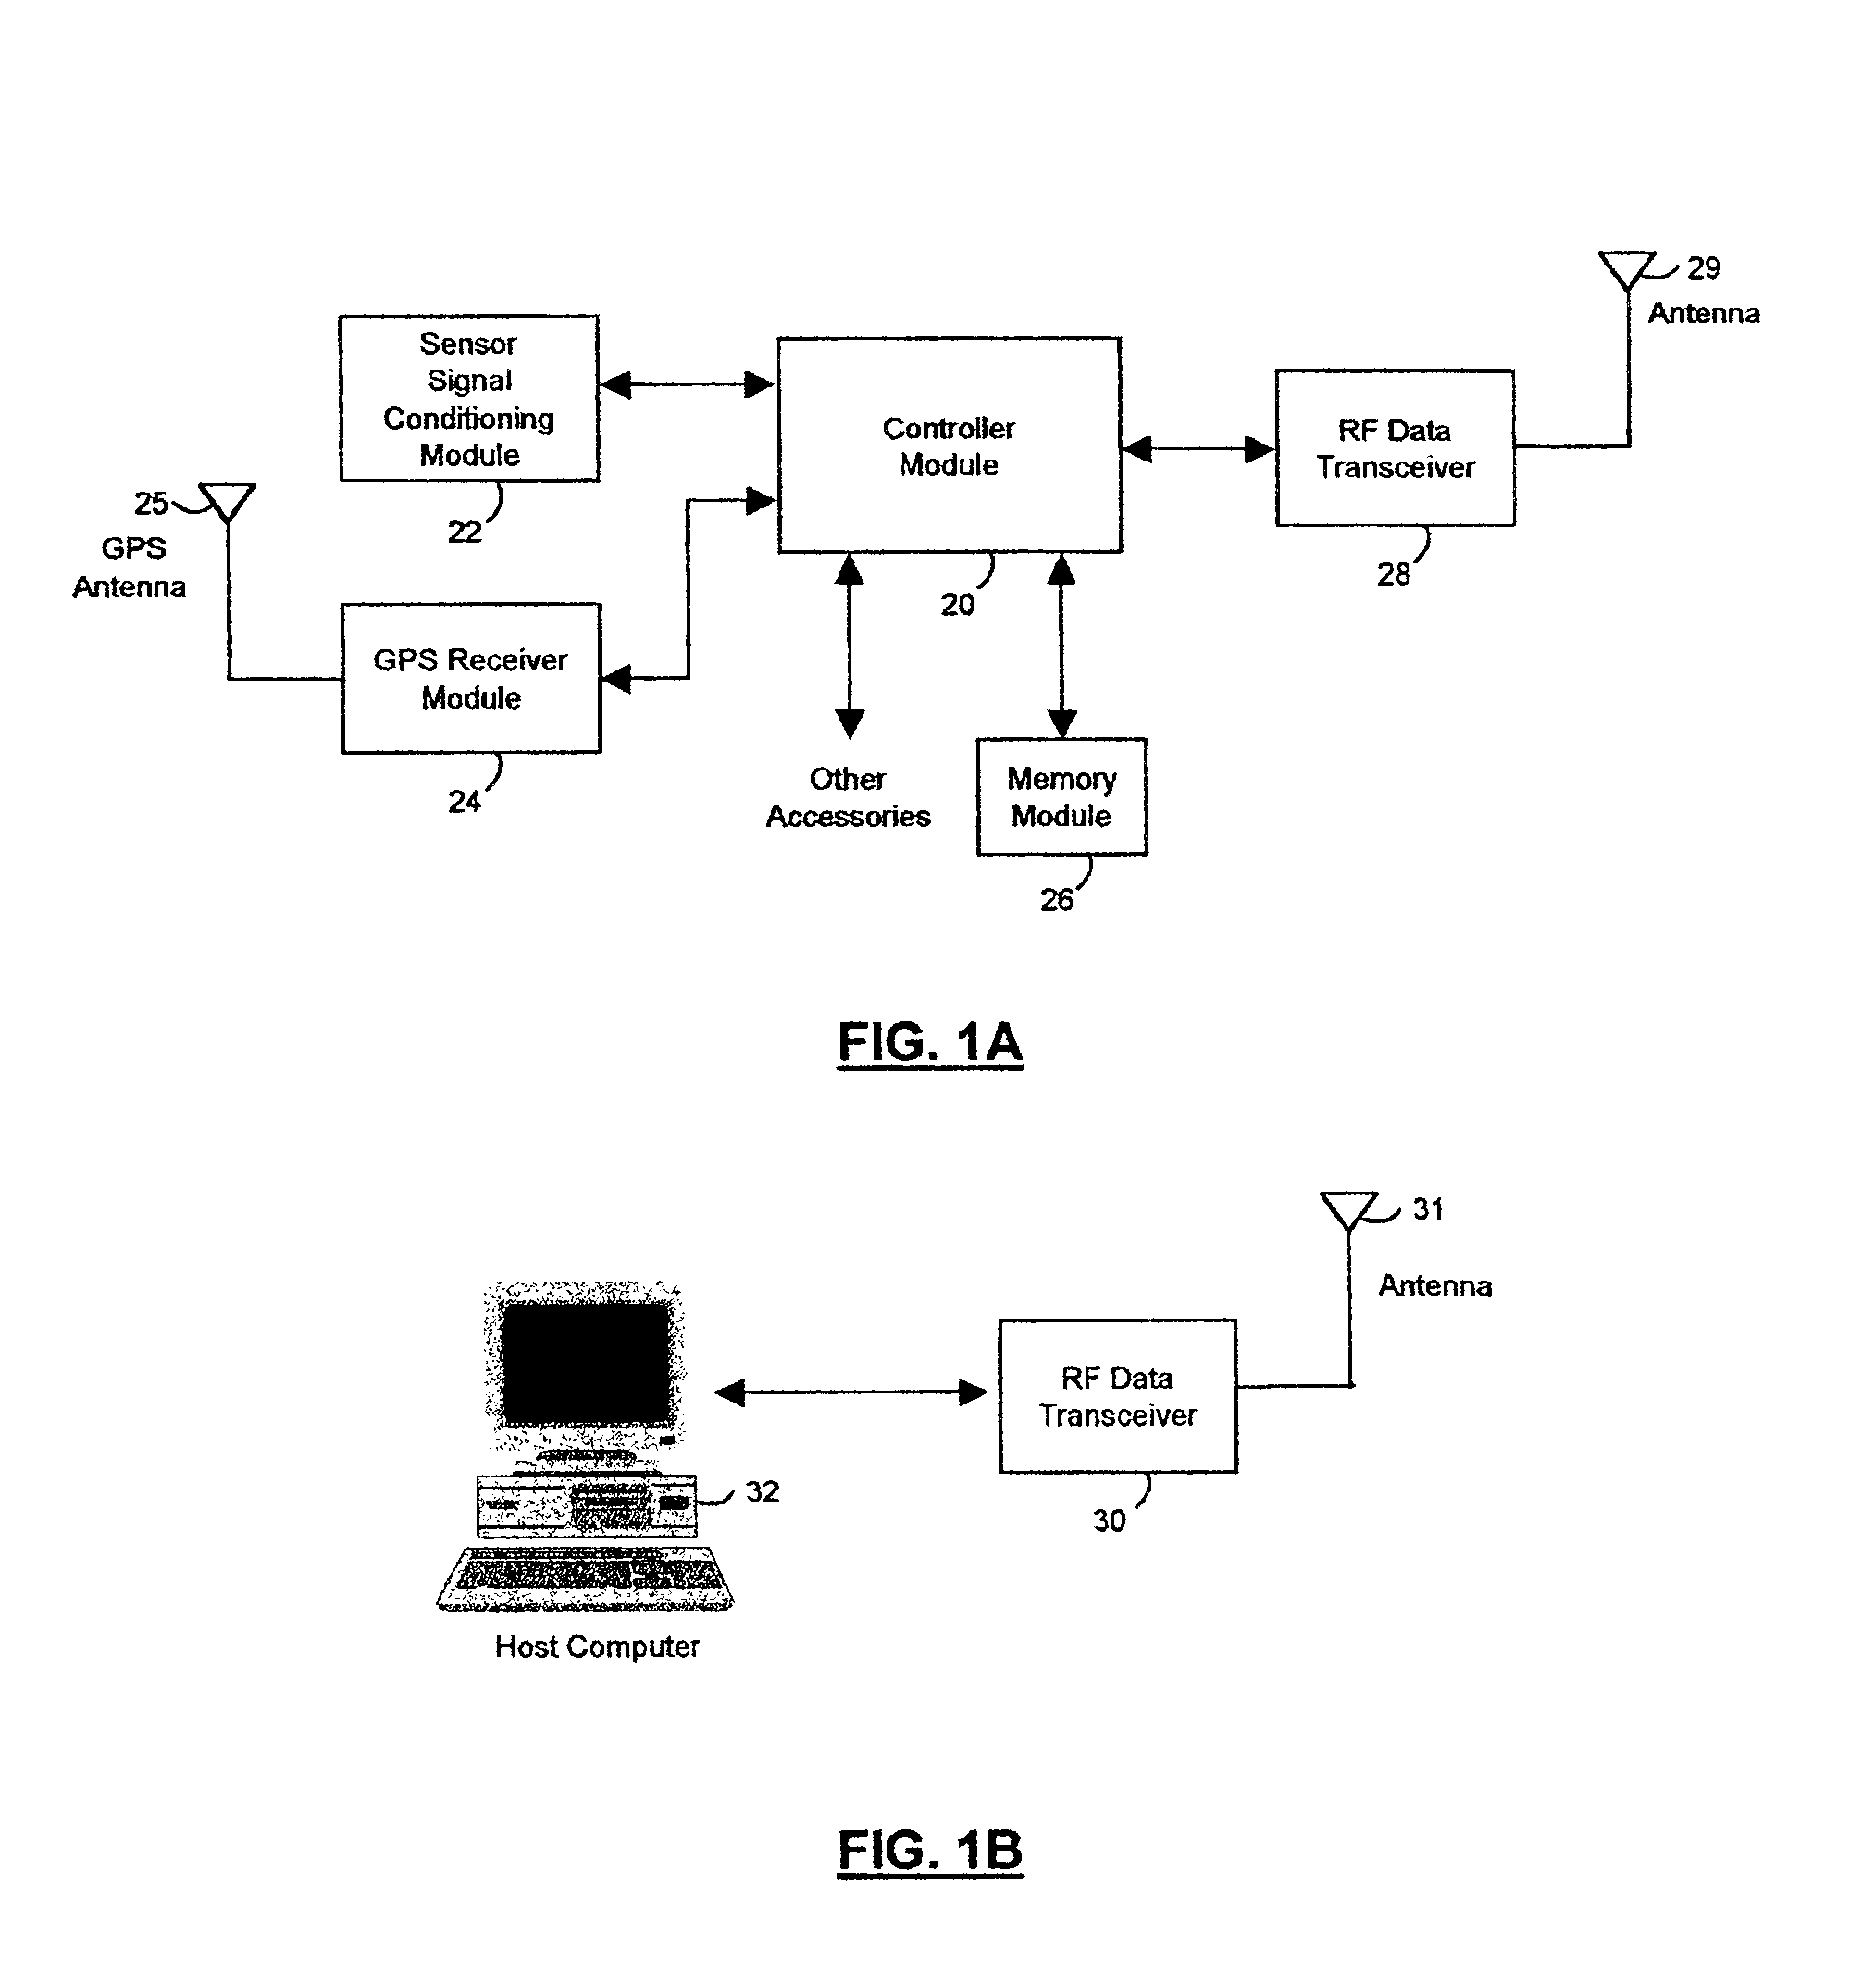 Self-contained flight data recorder with wireless data retrieval